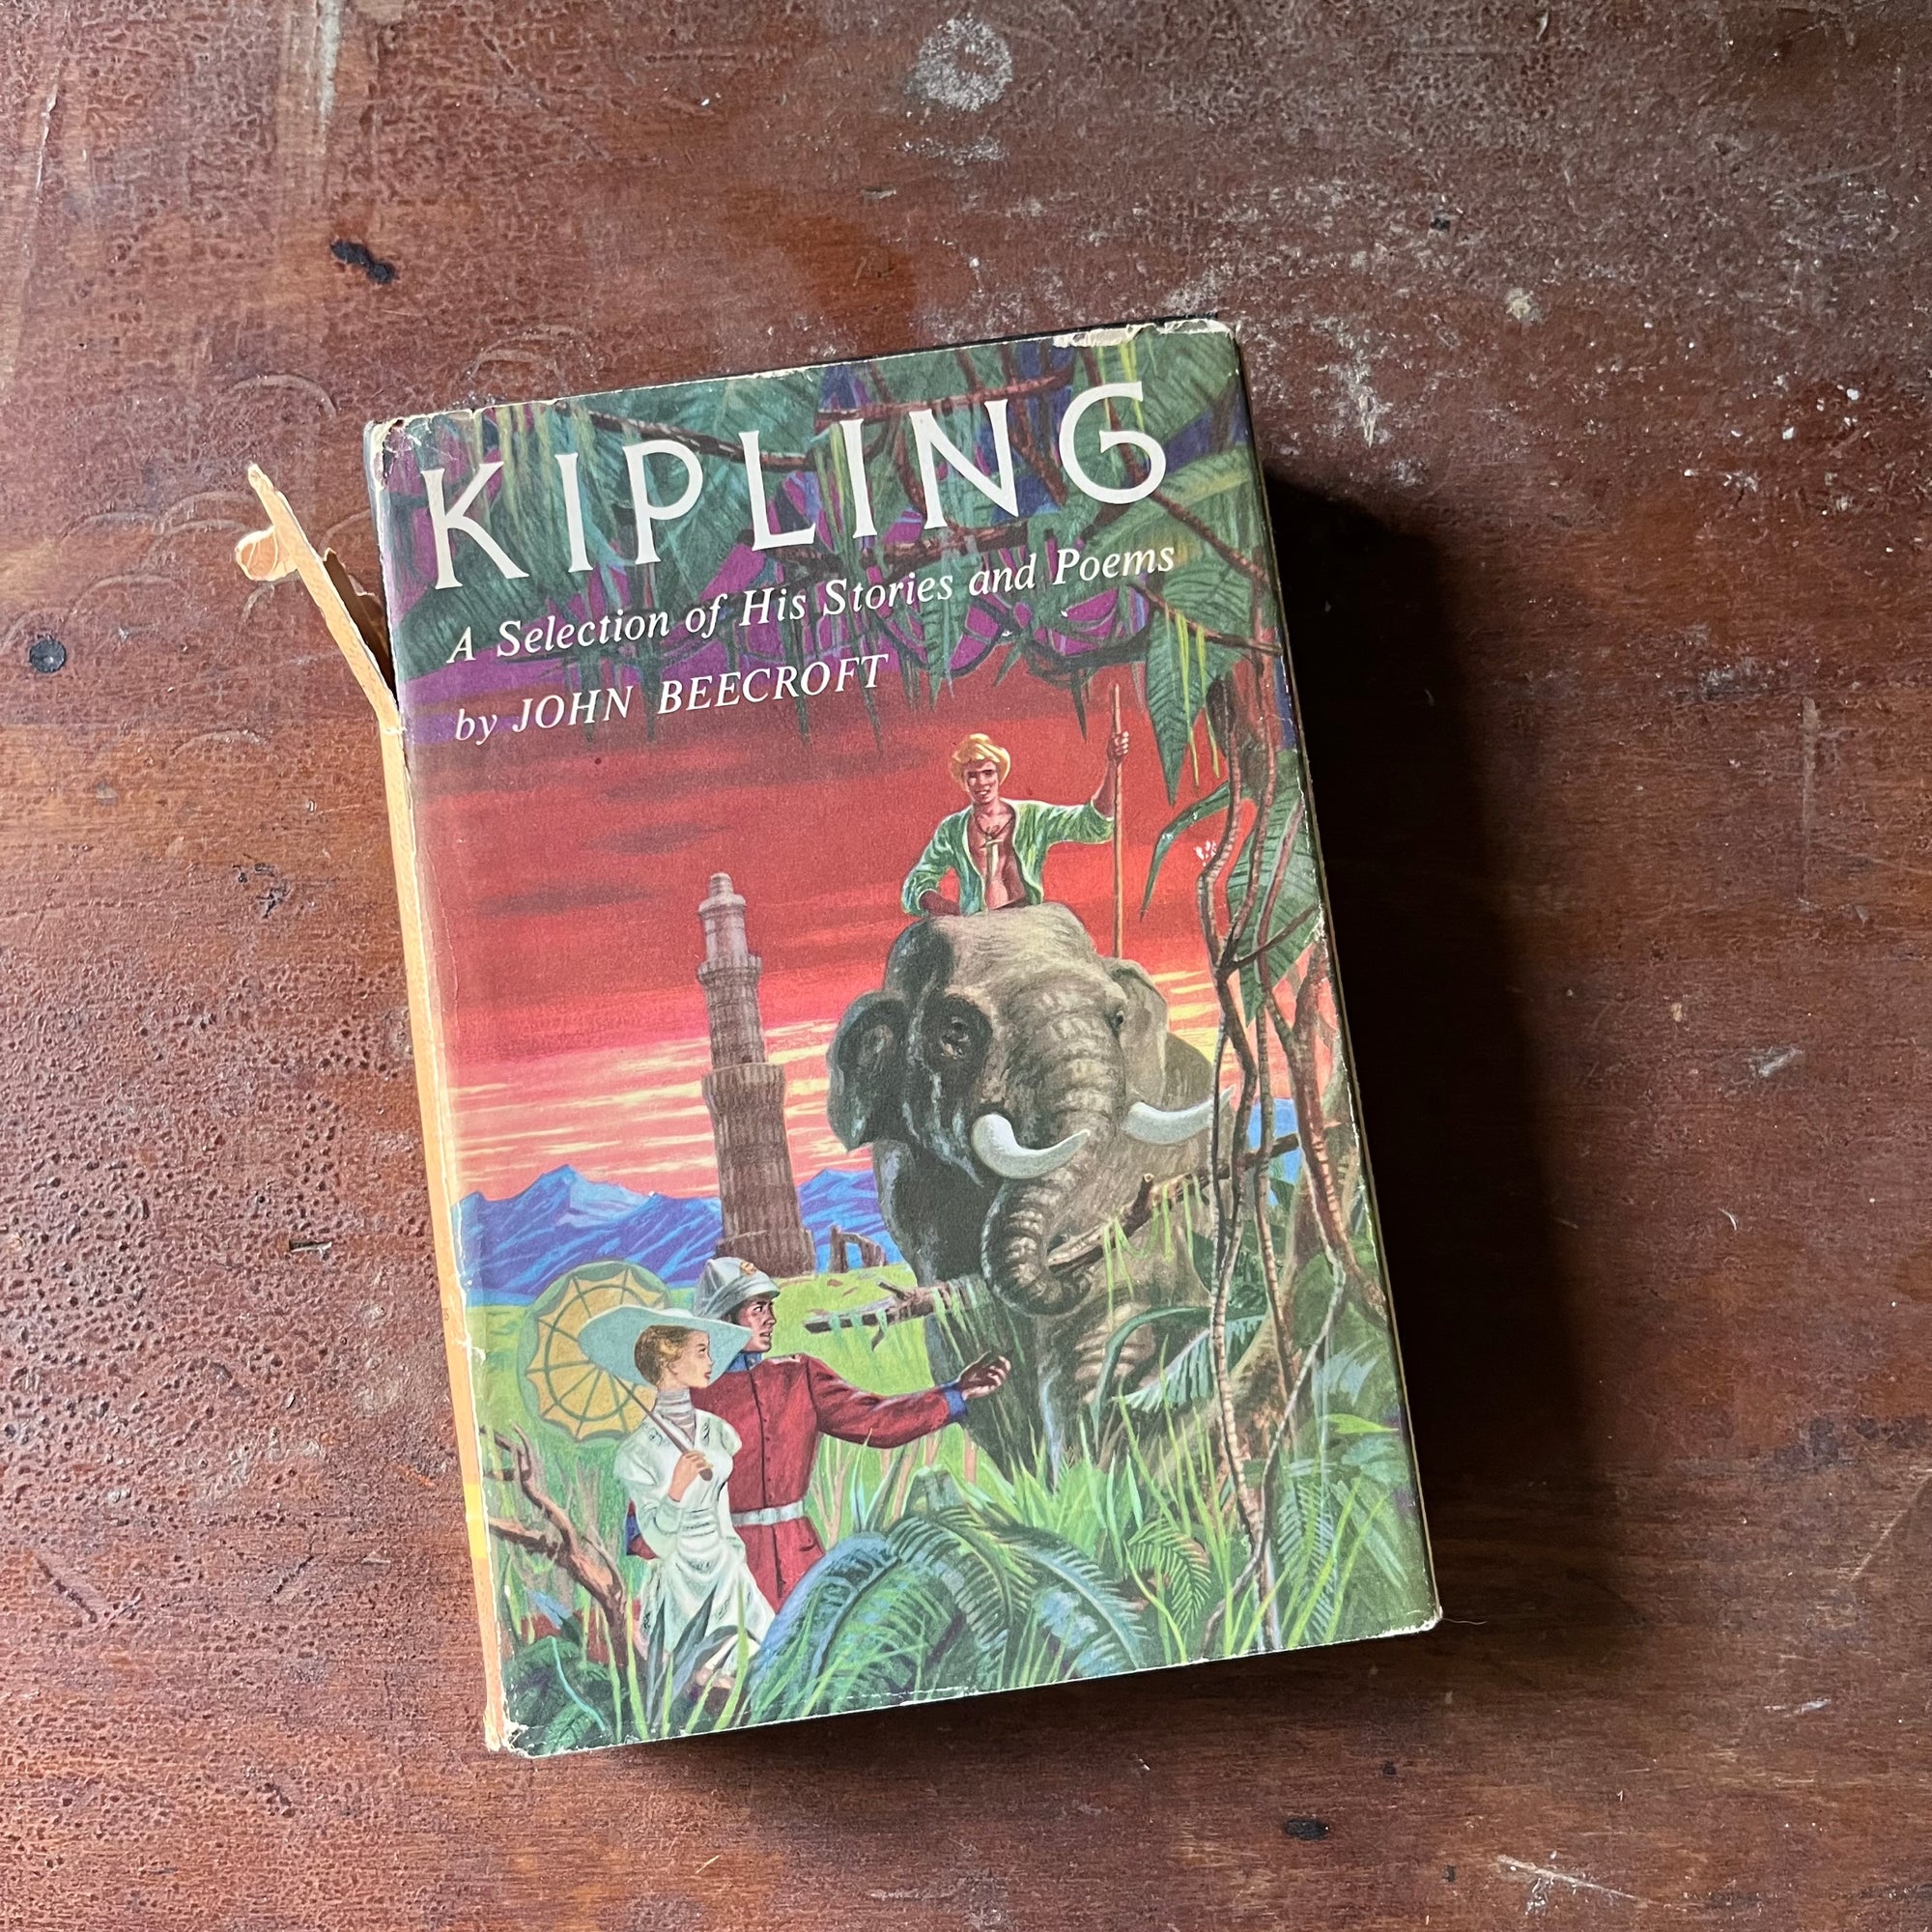 vintage short stories, vintage children's books - Kipling A Selection of His Stories and Poems by John Beecroft - view of the dust jacket's front cover